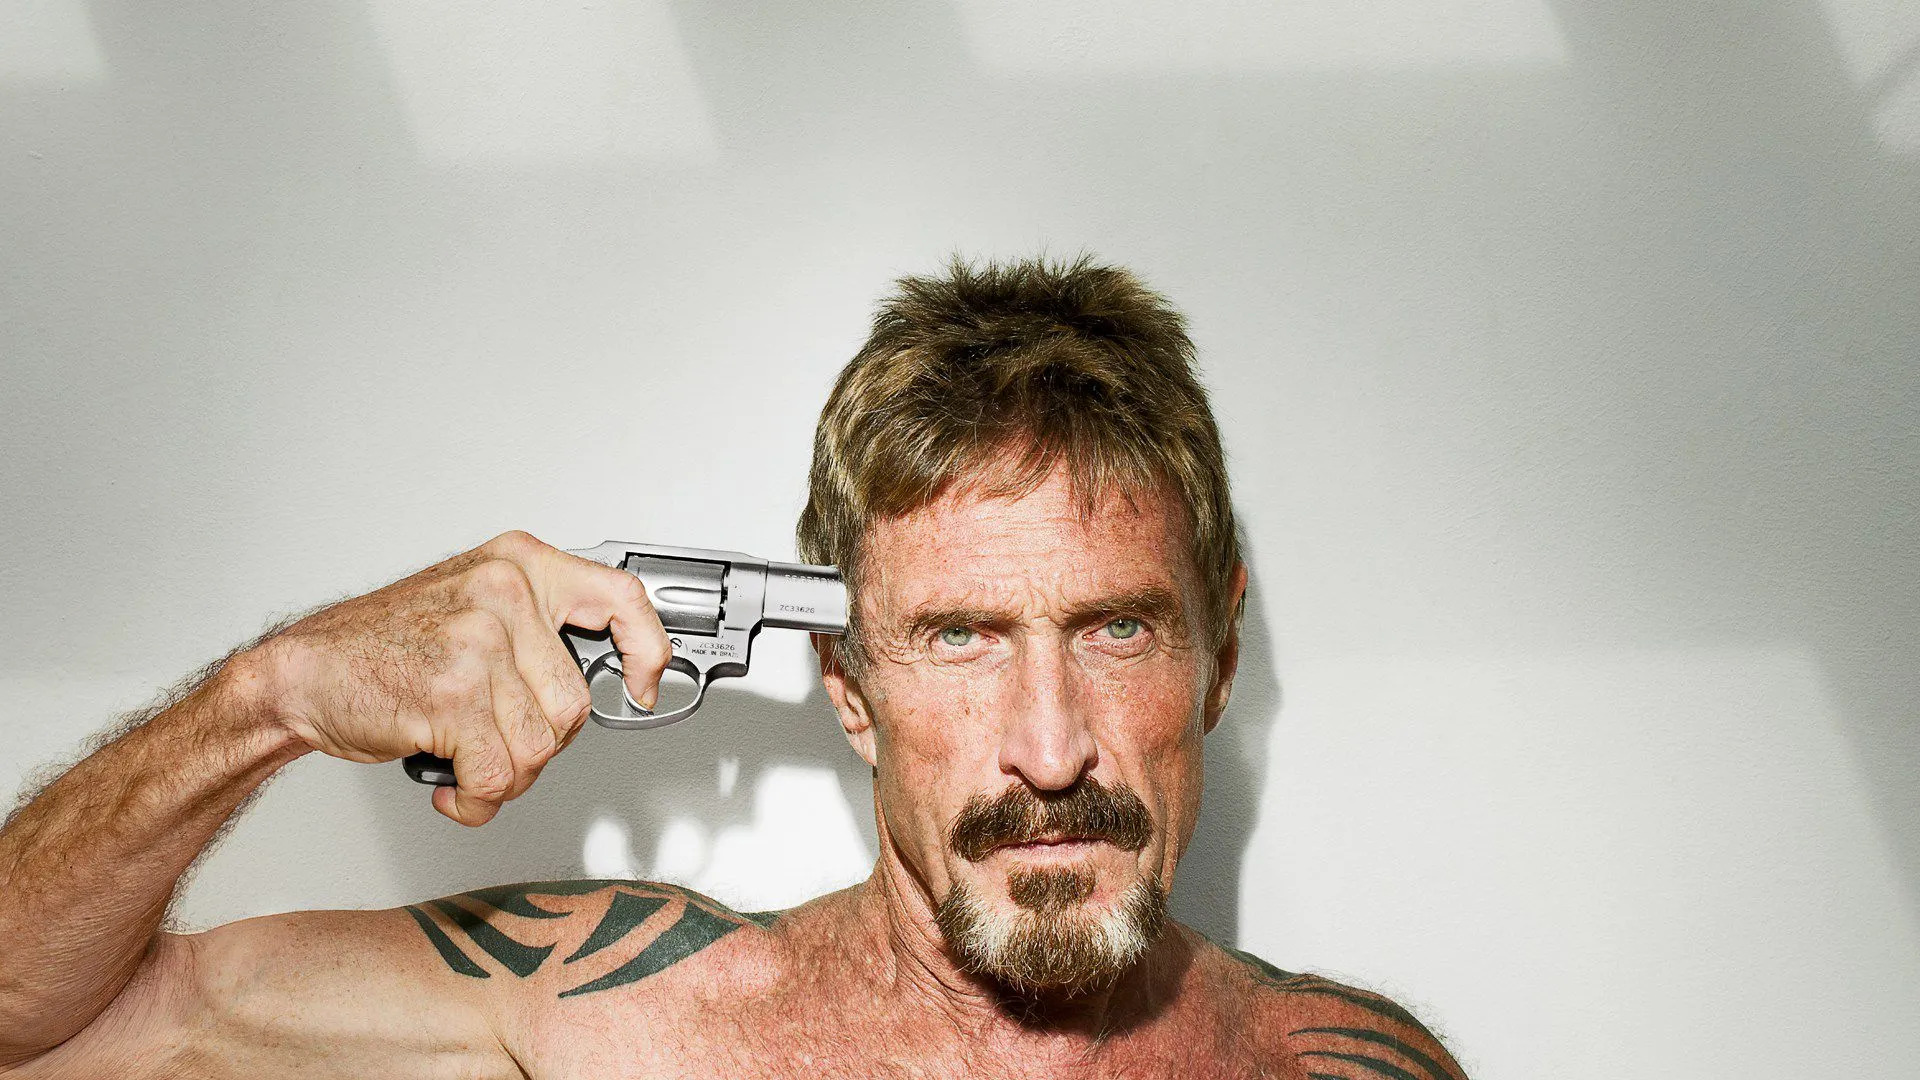 where is john mcafee now?